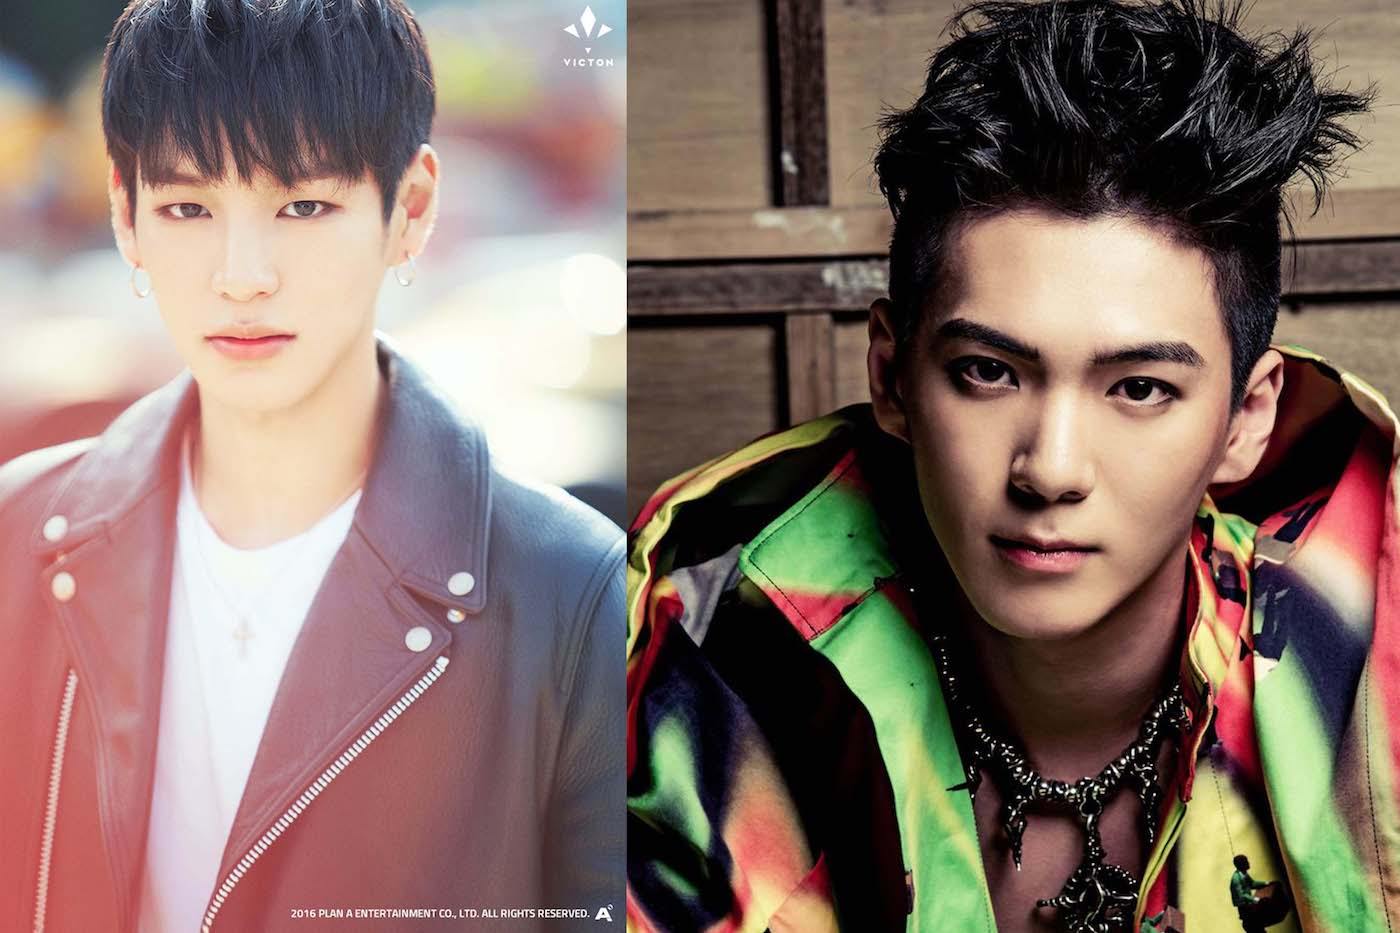 Heo Chan of VICTON (left) and Heo Jun of MADTOWN (right) are brothers! Both siblings are 